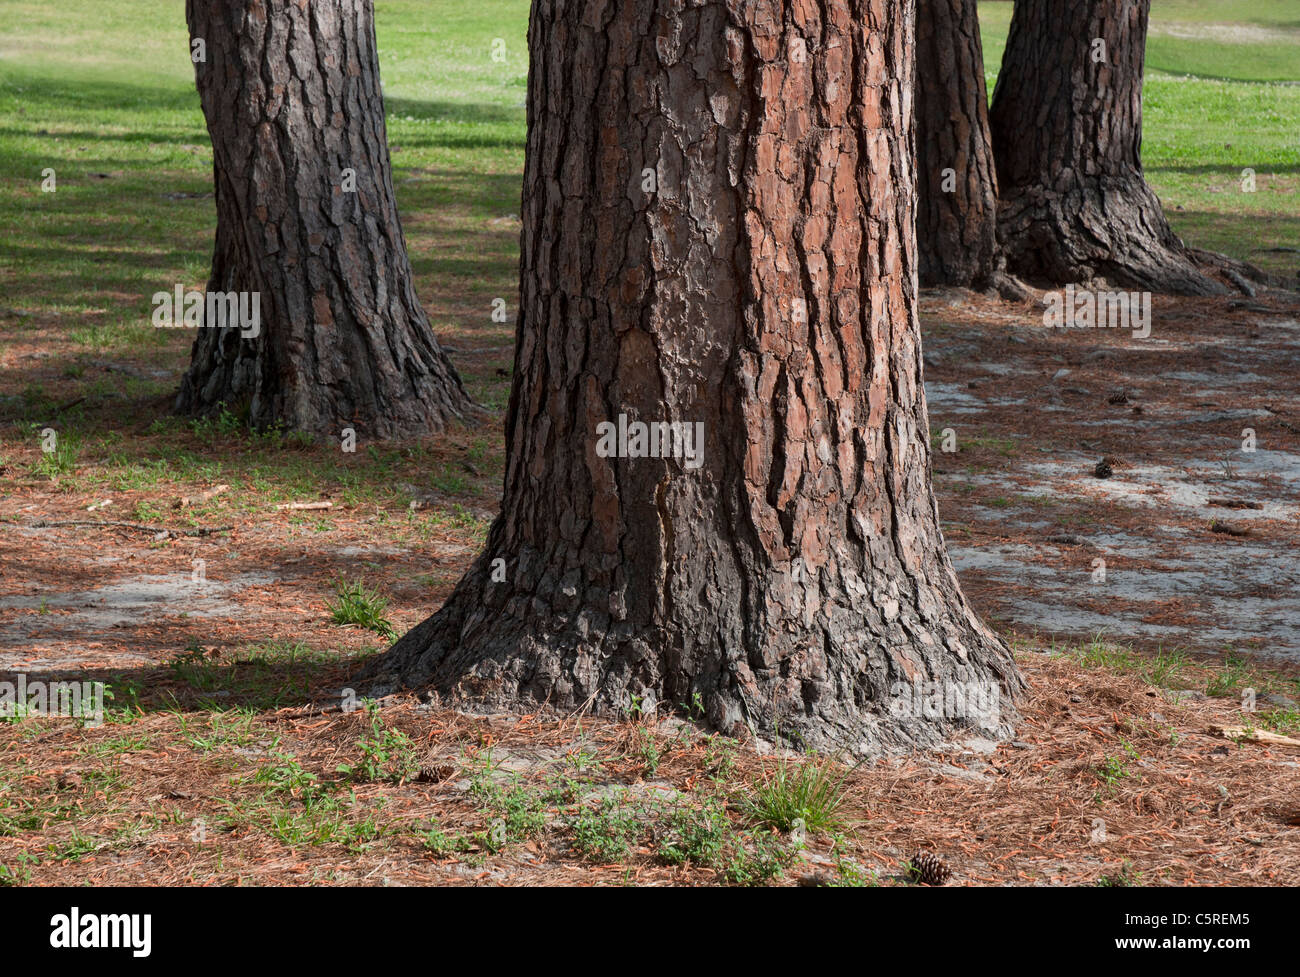 Santa Fe College Teaching Zoo Gainesville Florida. Longleaf pine trees on the college campus. Stock Photo